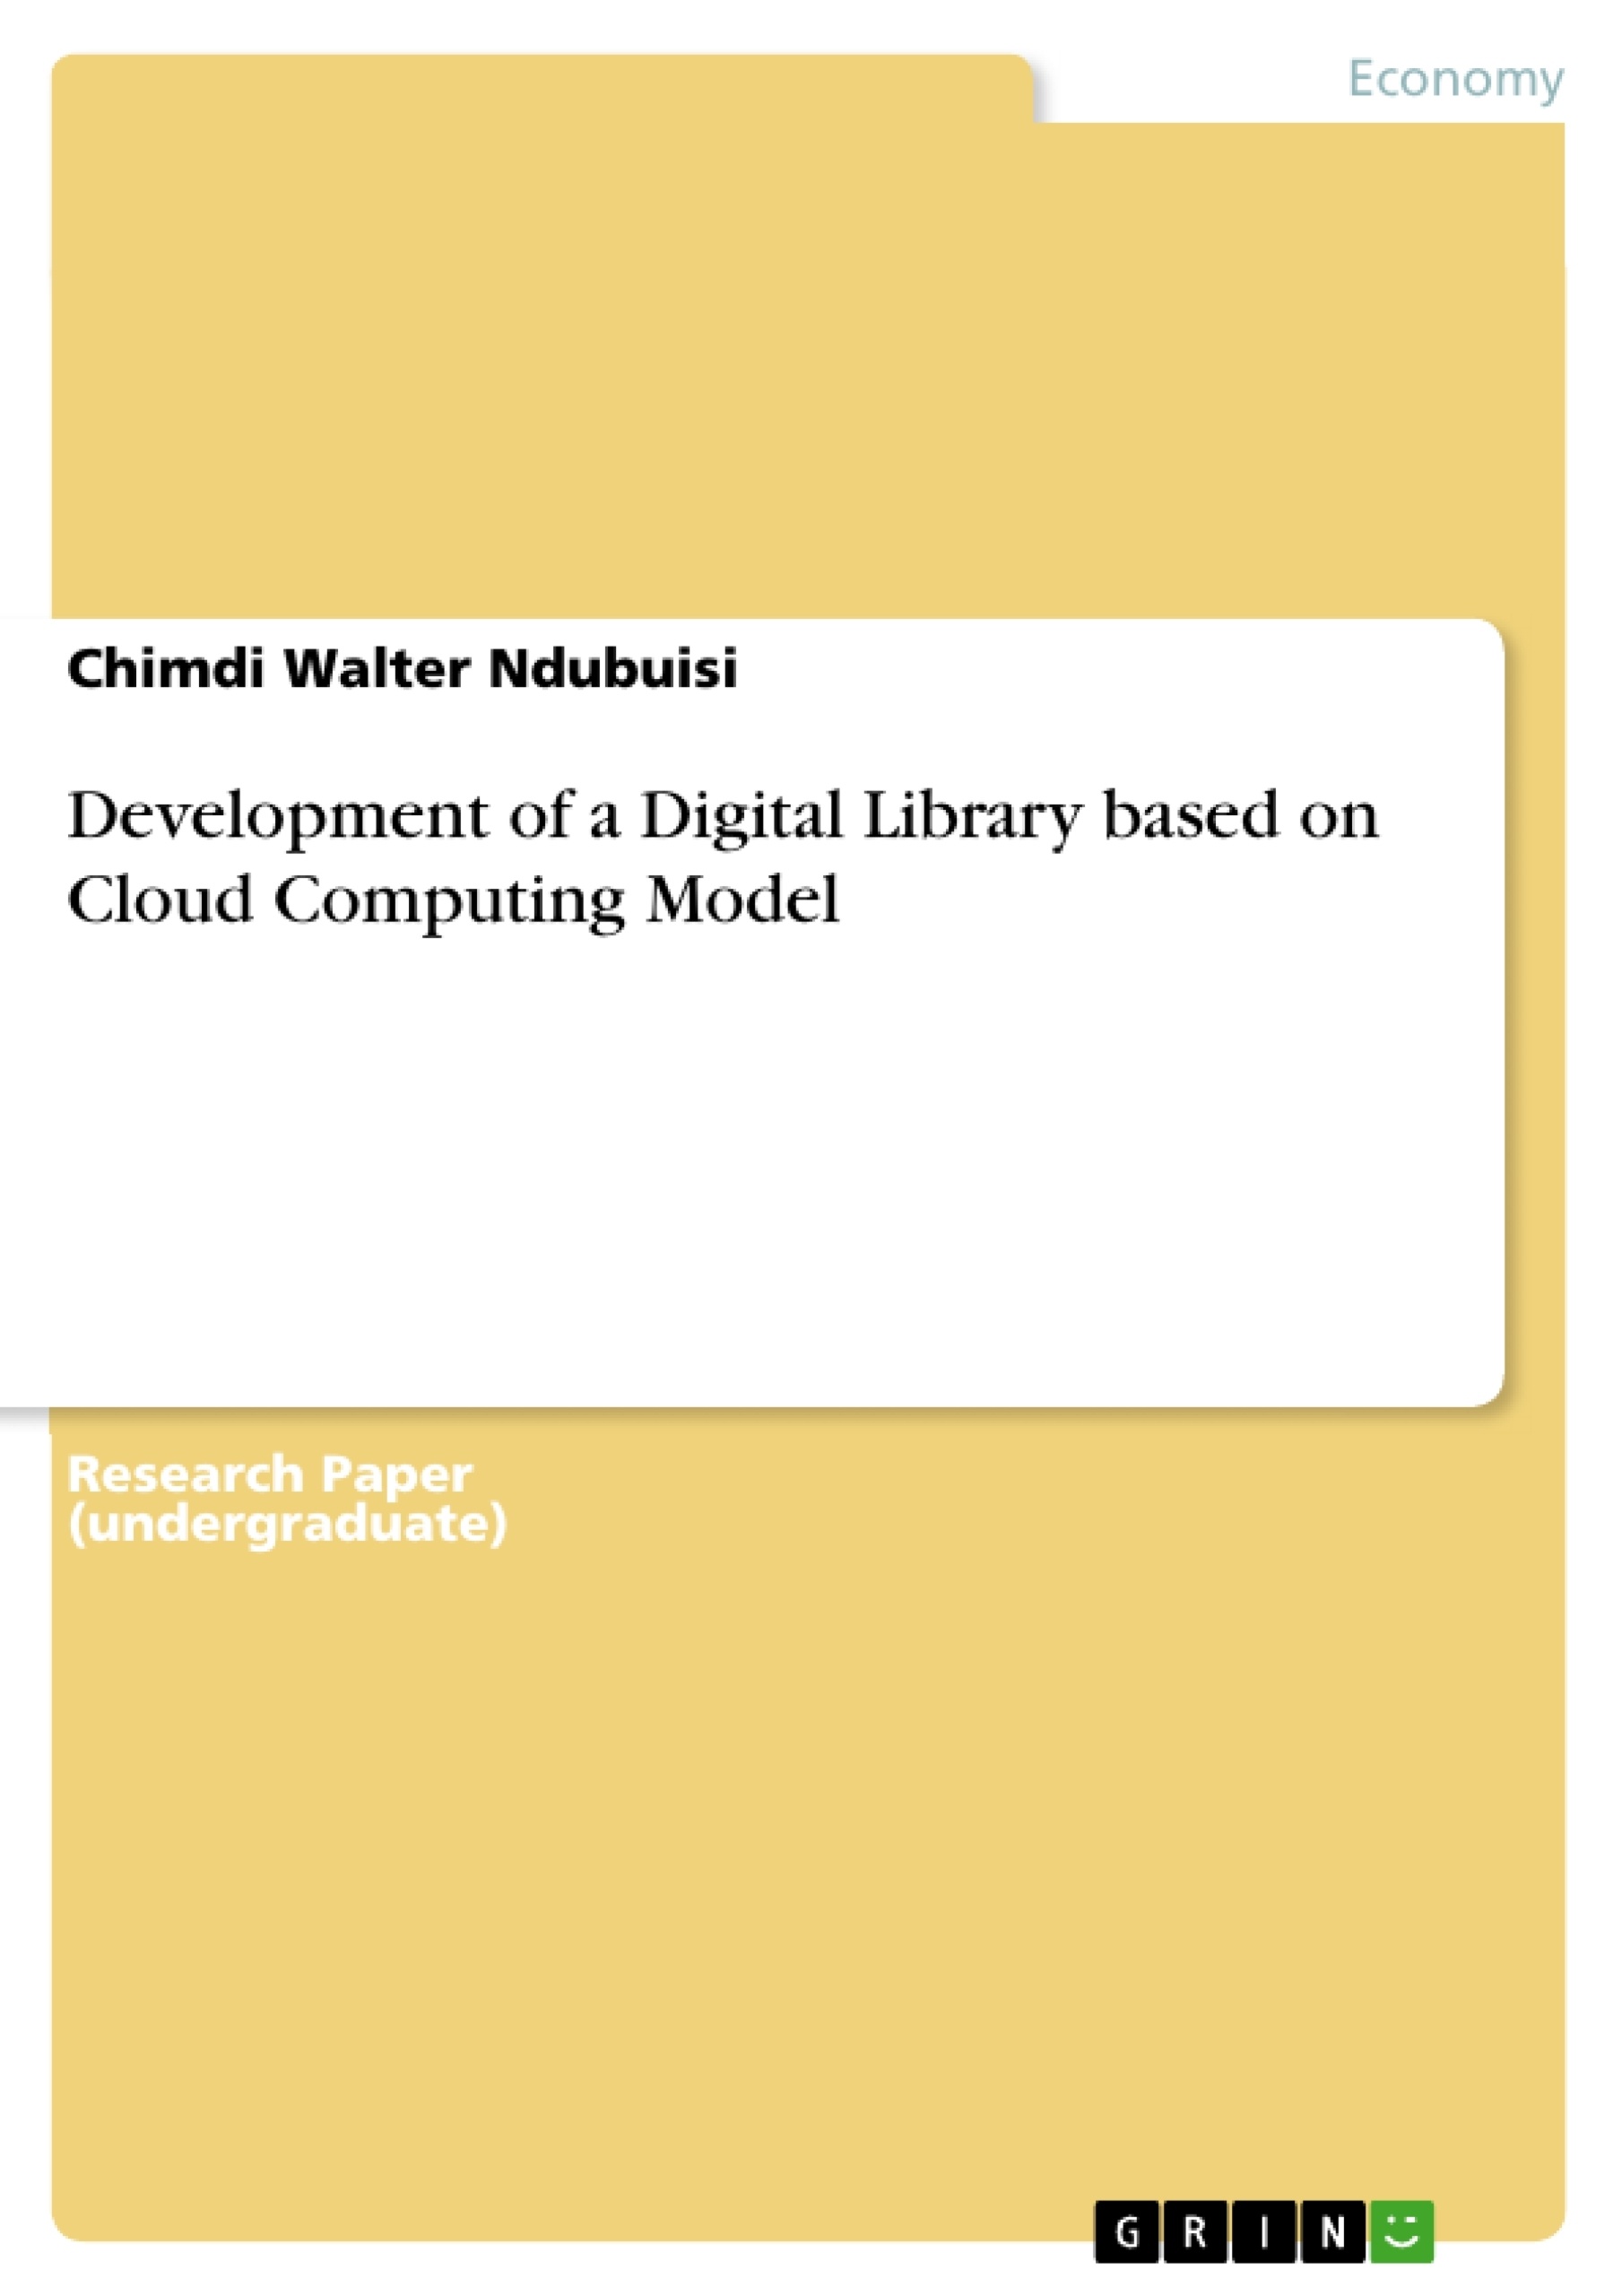 Library　based　Model　on　GRIN　Cloud　Computing　Development　a　of　Digital